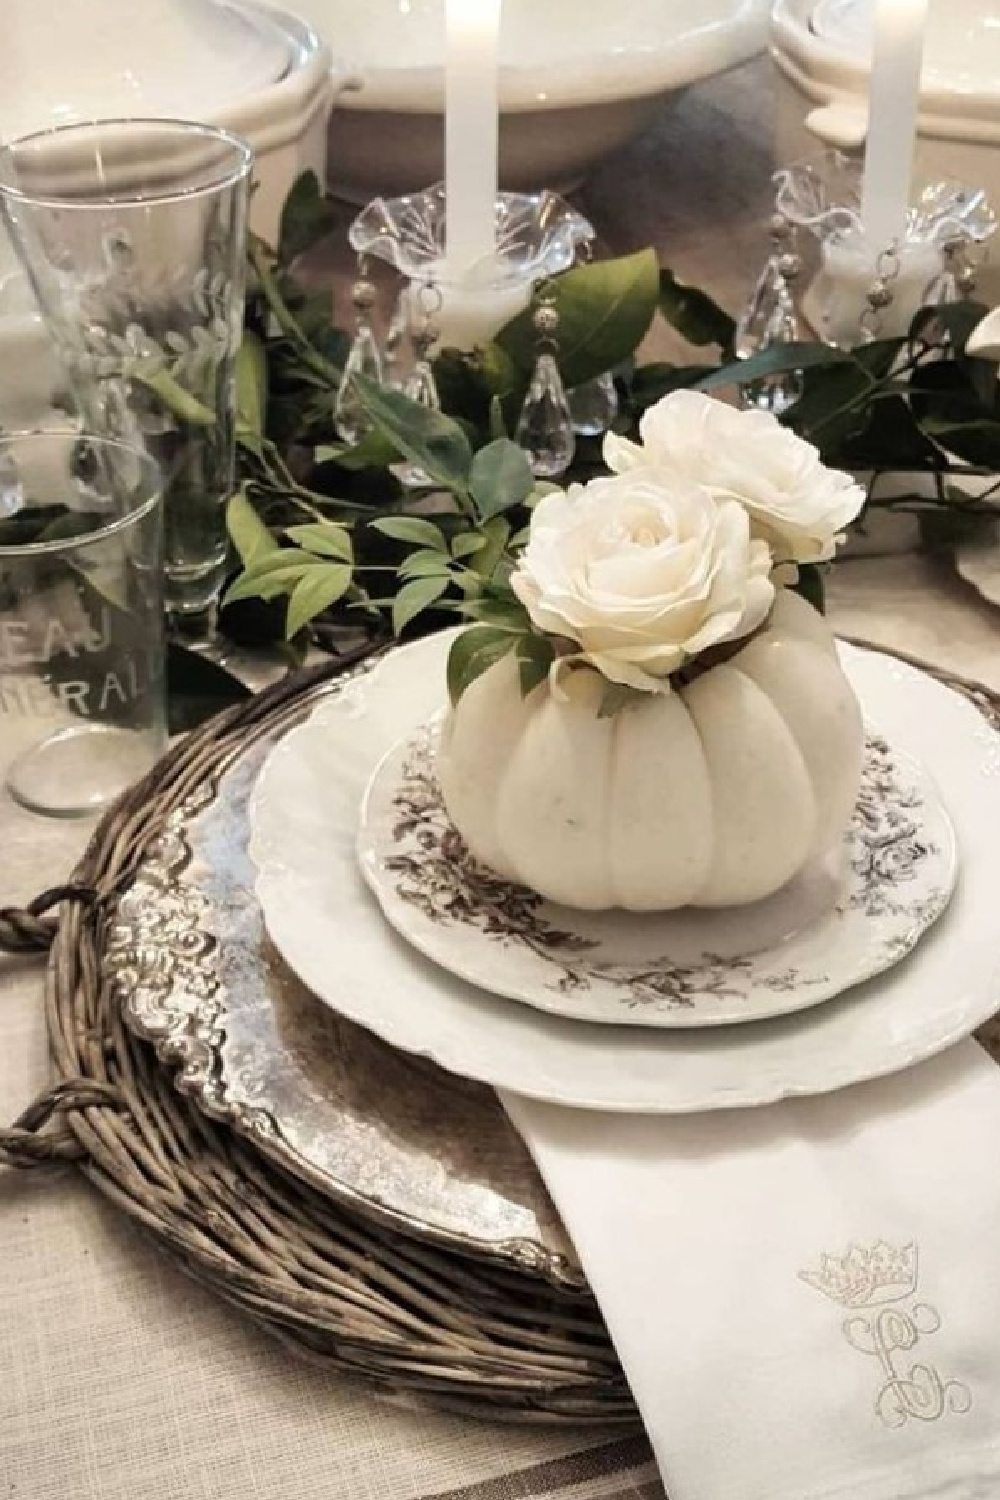 Elegant Thanksgiving placesetting with white pumpkin and white roses plus ironstone and brown transferware plates - @thefrenchnestcointeriordesign. #falltable #thanksgivingtablescape